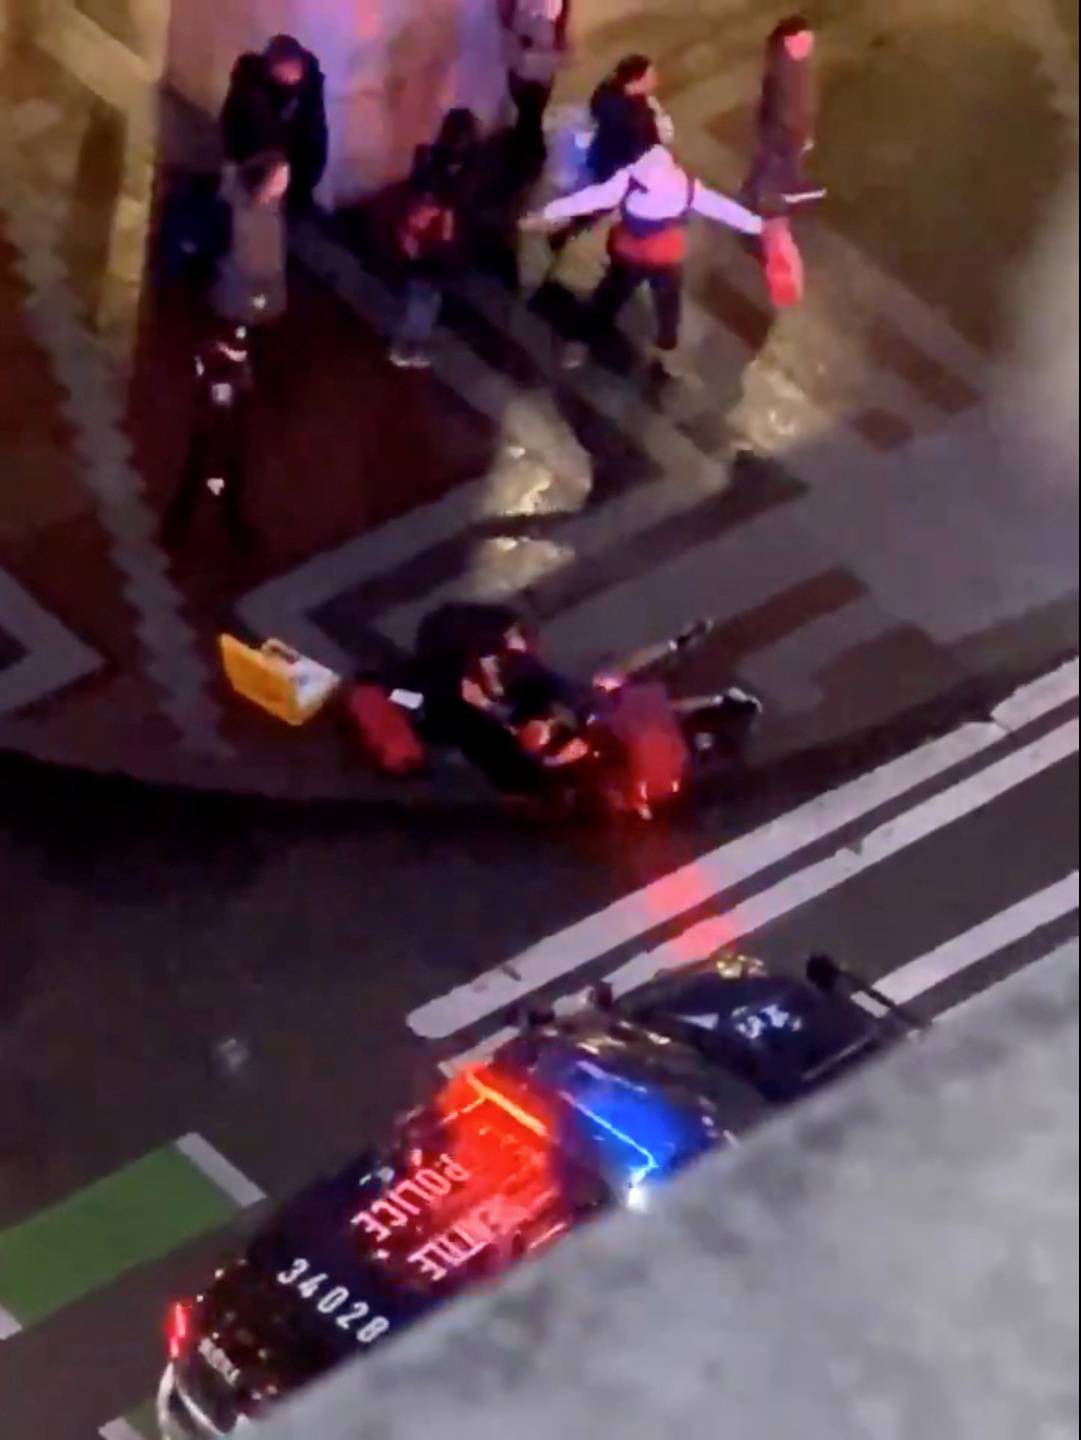 Police and emergency officials attend to the injured following a shooting in Seattle